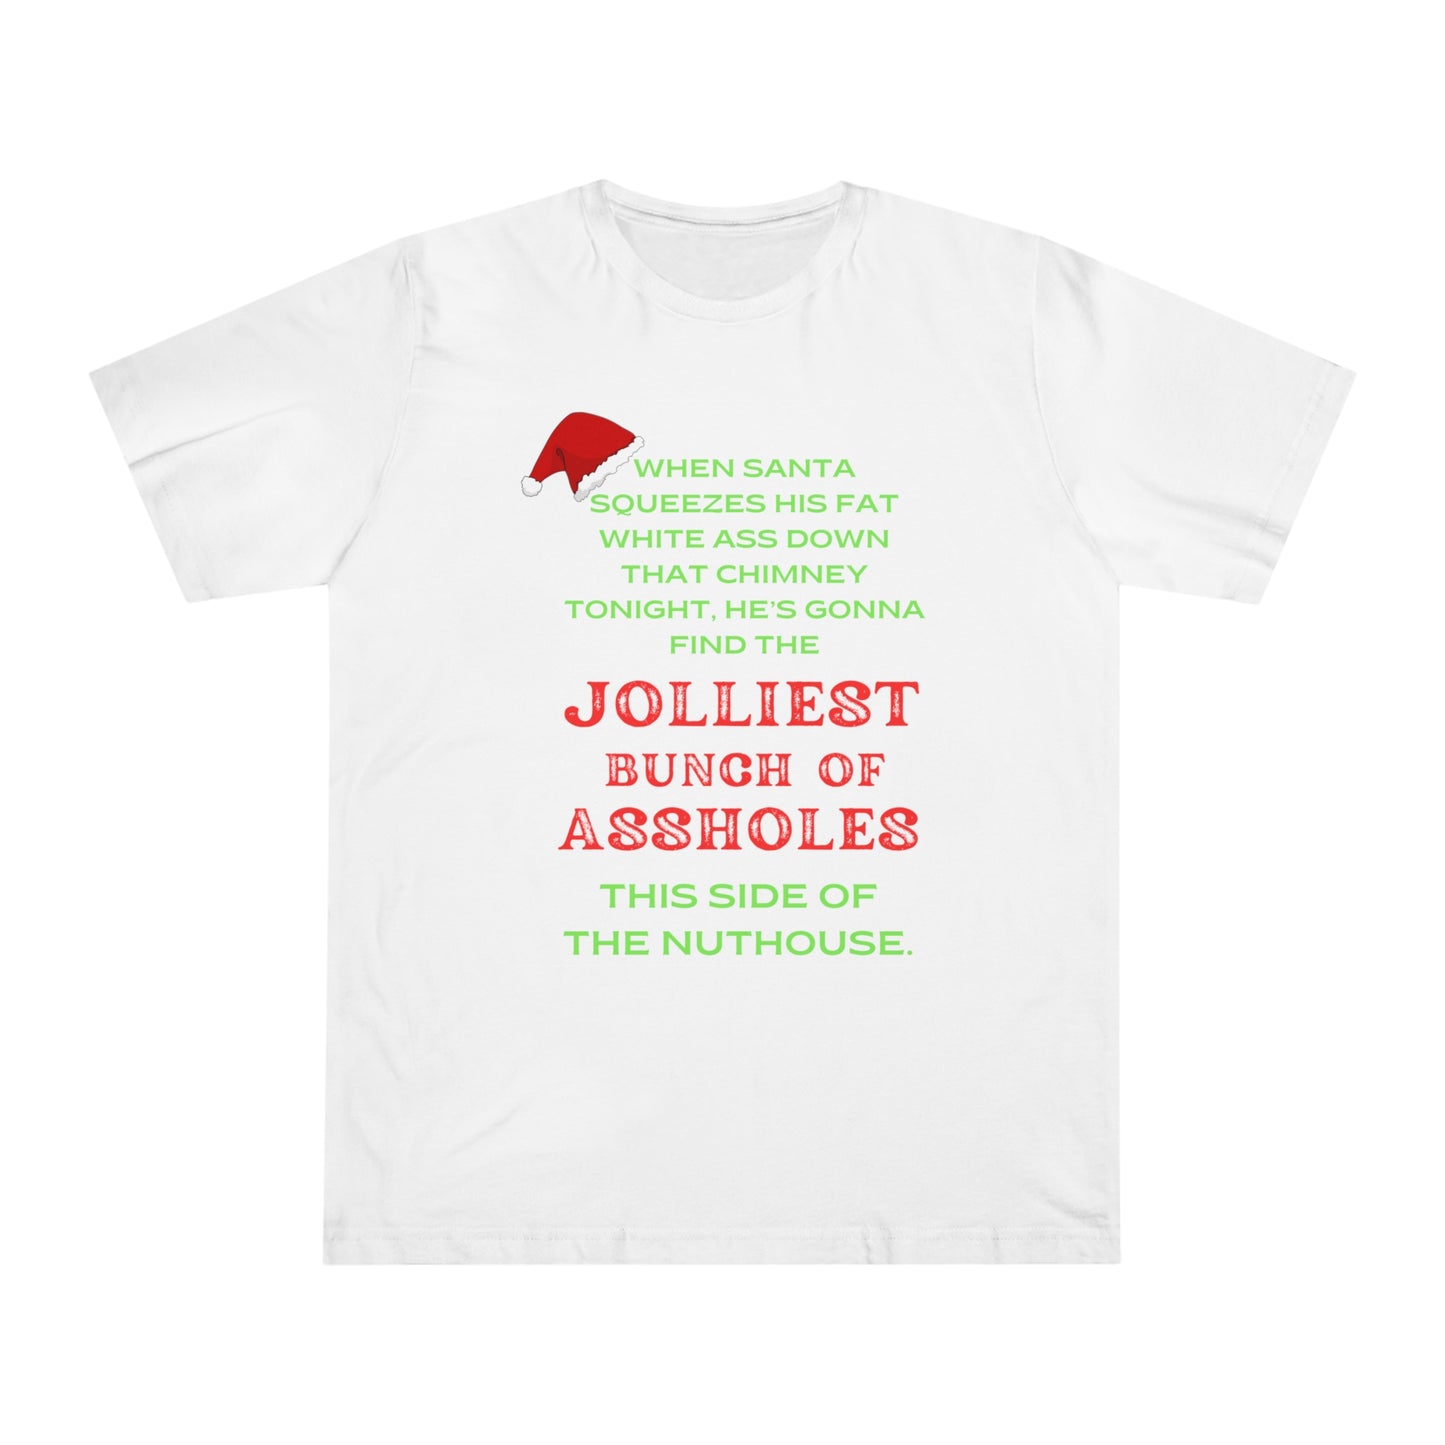 Jolliest Bunch of Assholes Christmas T-Shirt - Hilarious Holiday Gift for Nutty Families